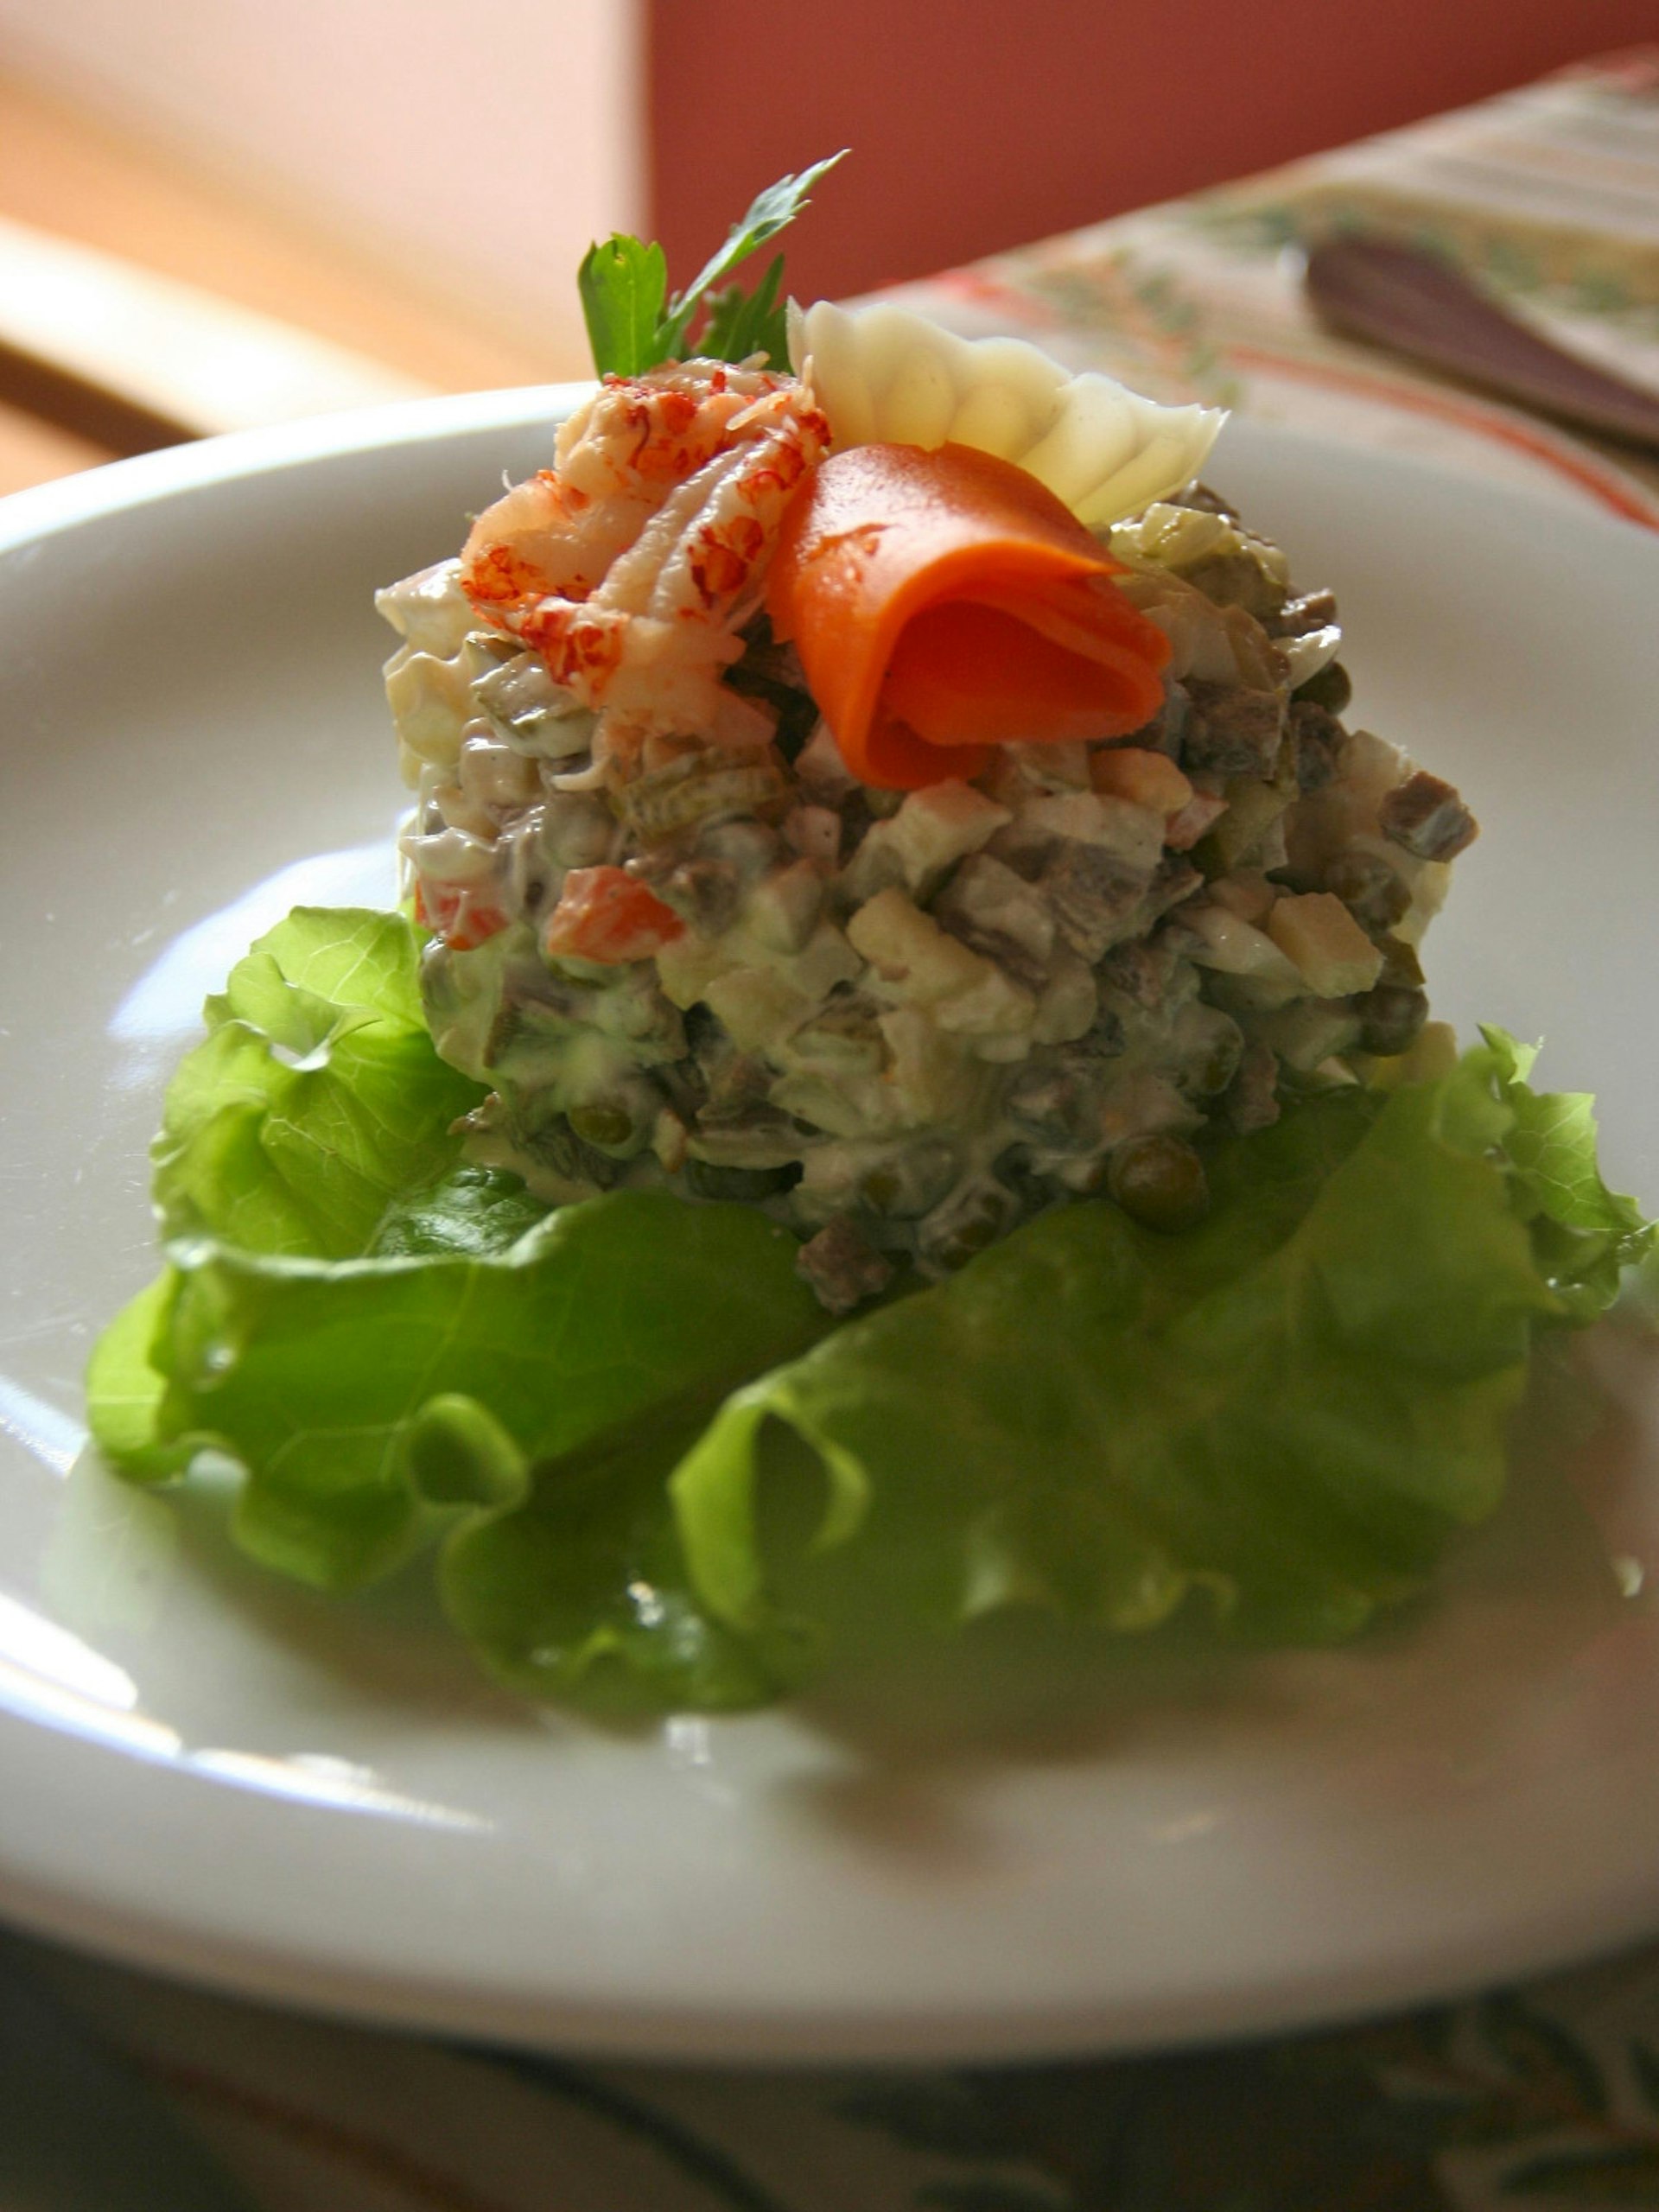 Salat Olivye (Olivier salad) is one of the most popular recipes on Russian restaurant menus © Simon Richmond / Lonely Planet